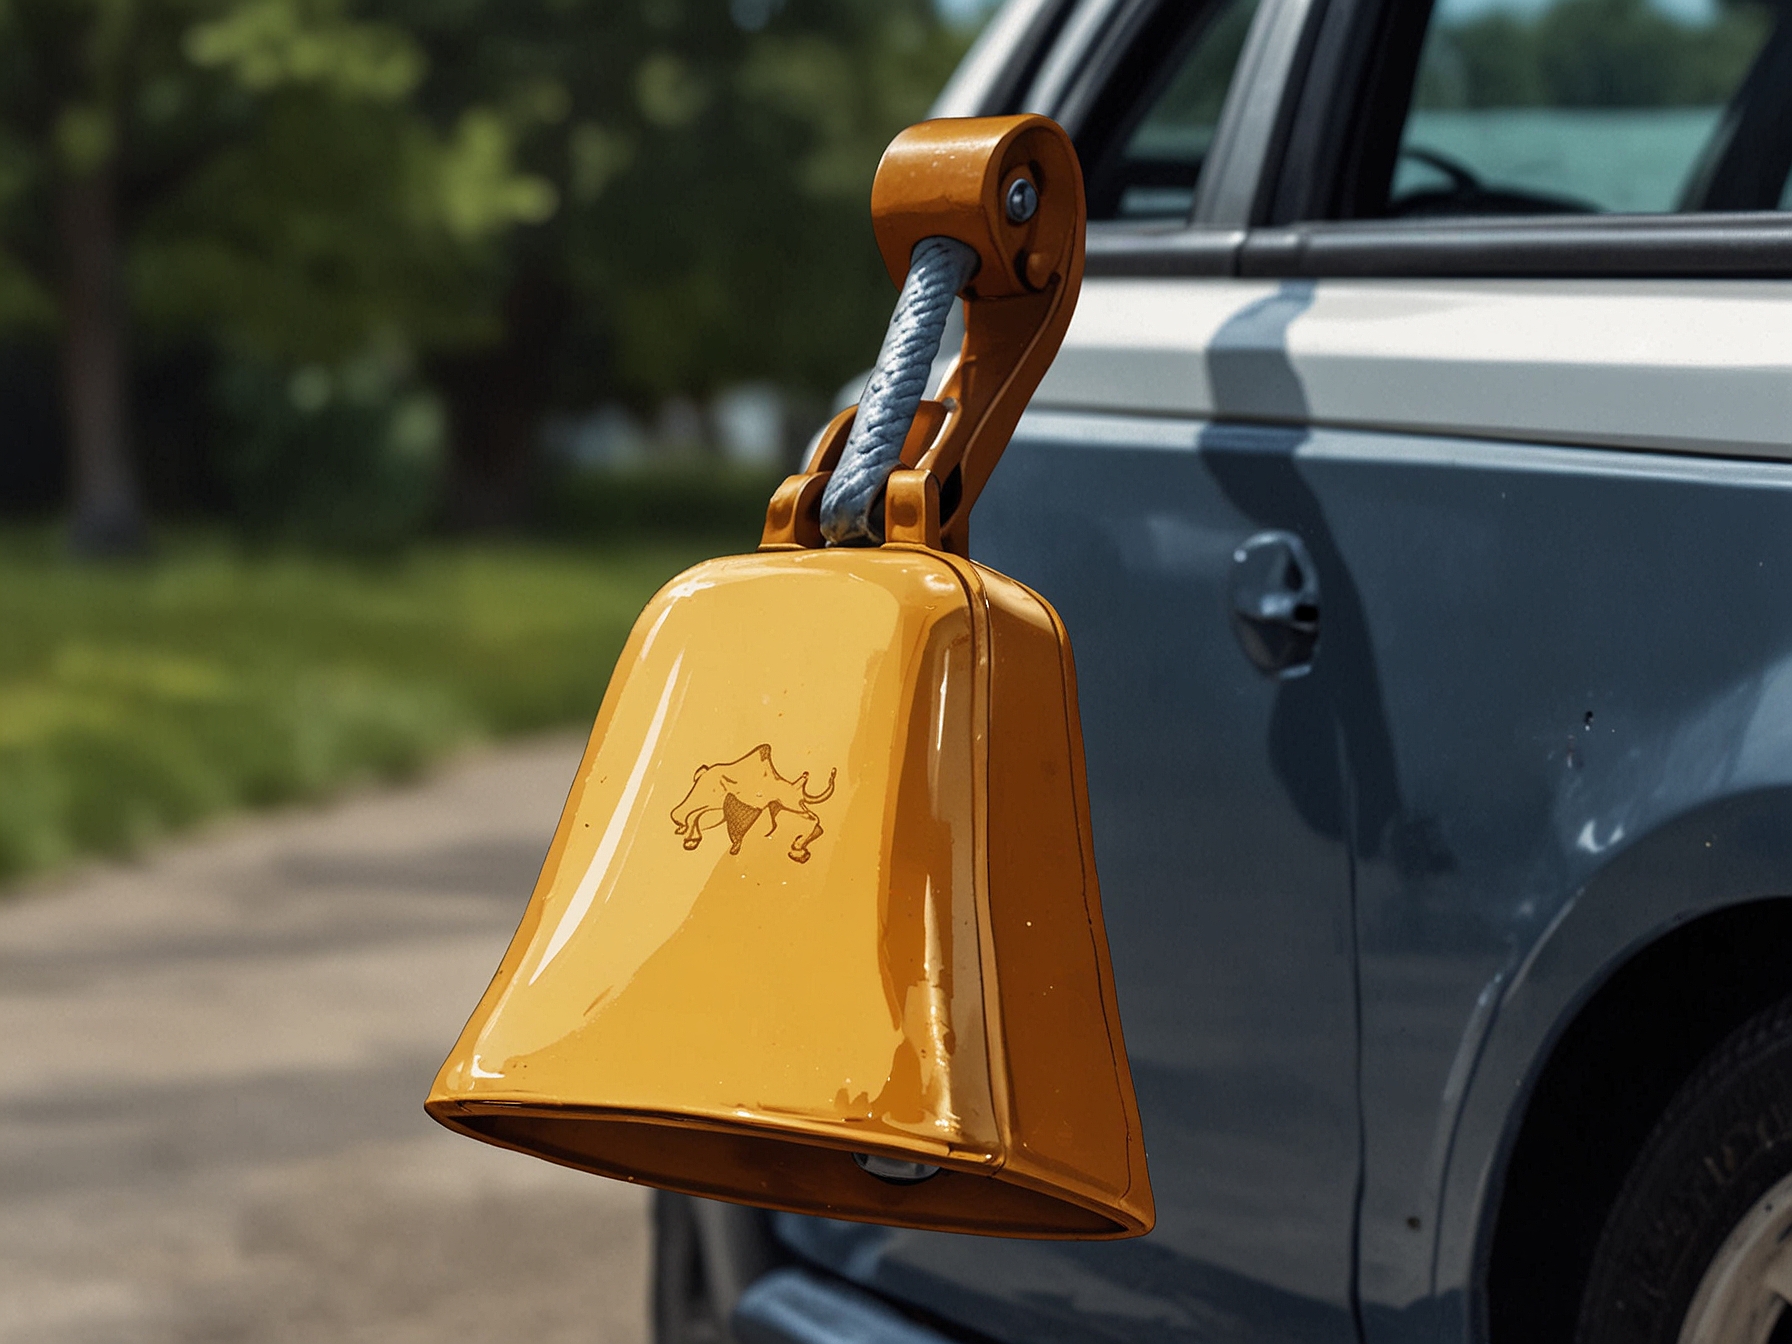 A large cow bell is hung from the side mirror of the car, adding a humorous Texan touch to the effective, harmless revenge for blocking the driveway.